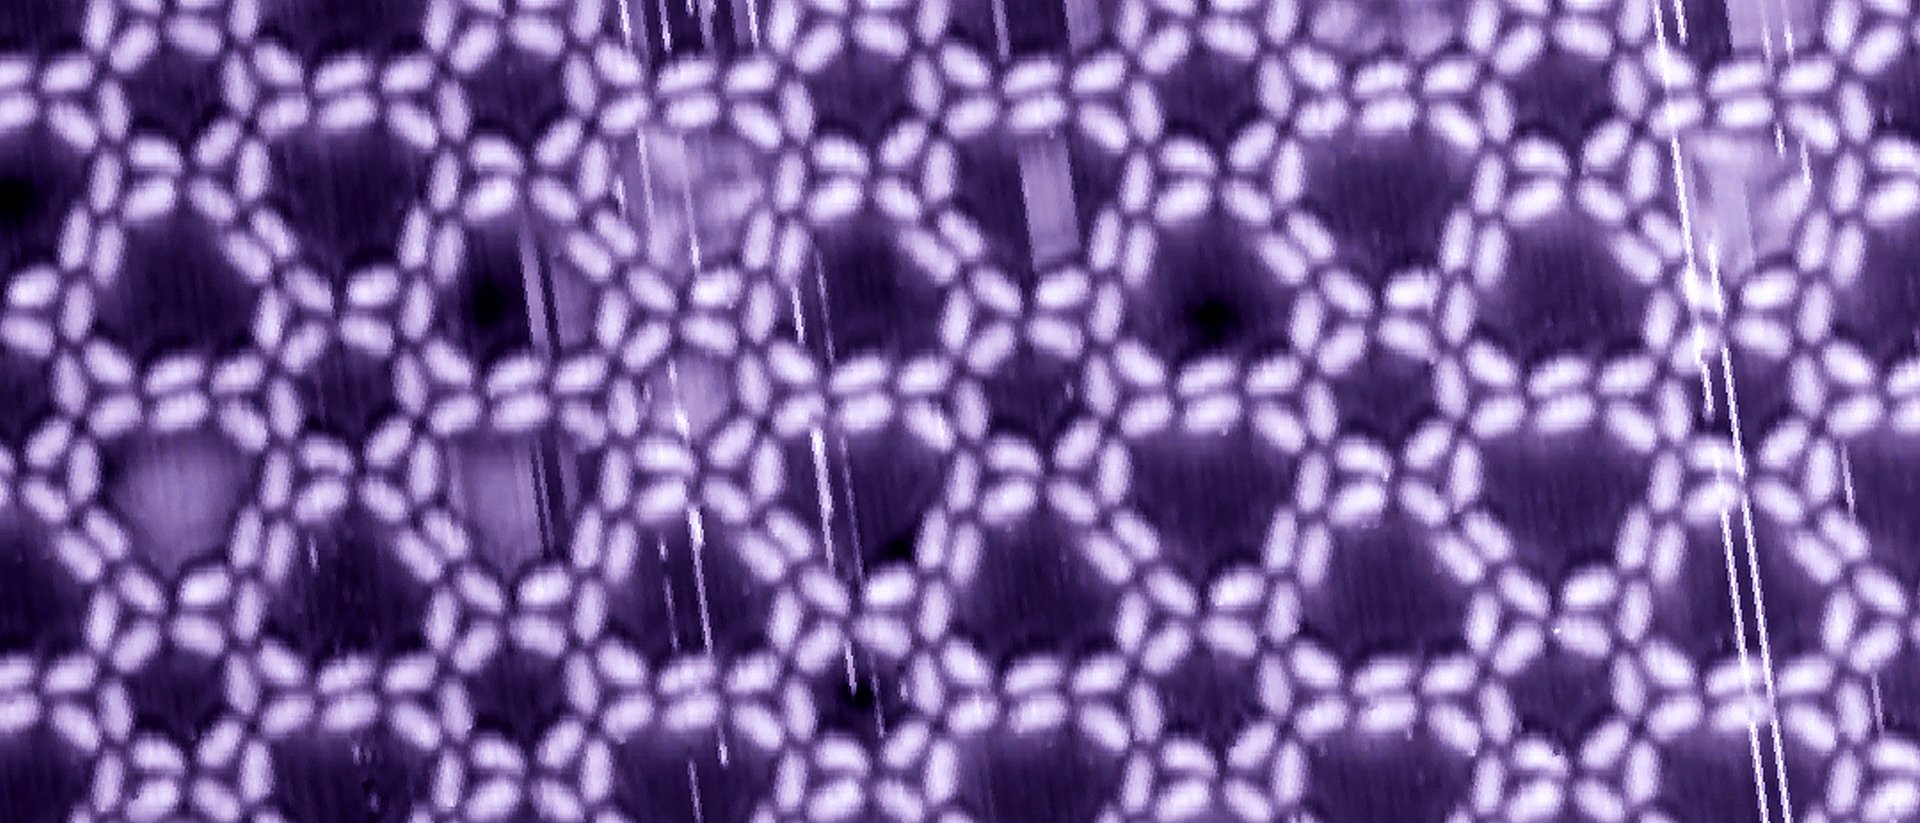 Complex supramolecular nano-structure on a silver surface. The chiral pattern is controlled by hydrogen-bonding between hydroxamic acids decorating both ends of the rod-like building block.